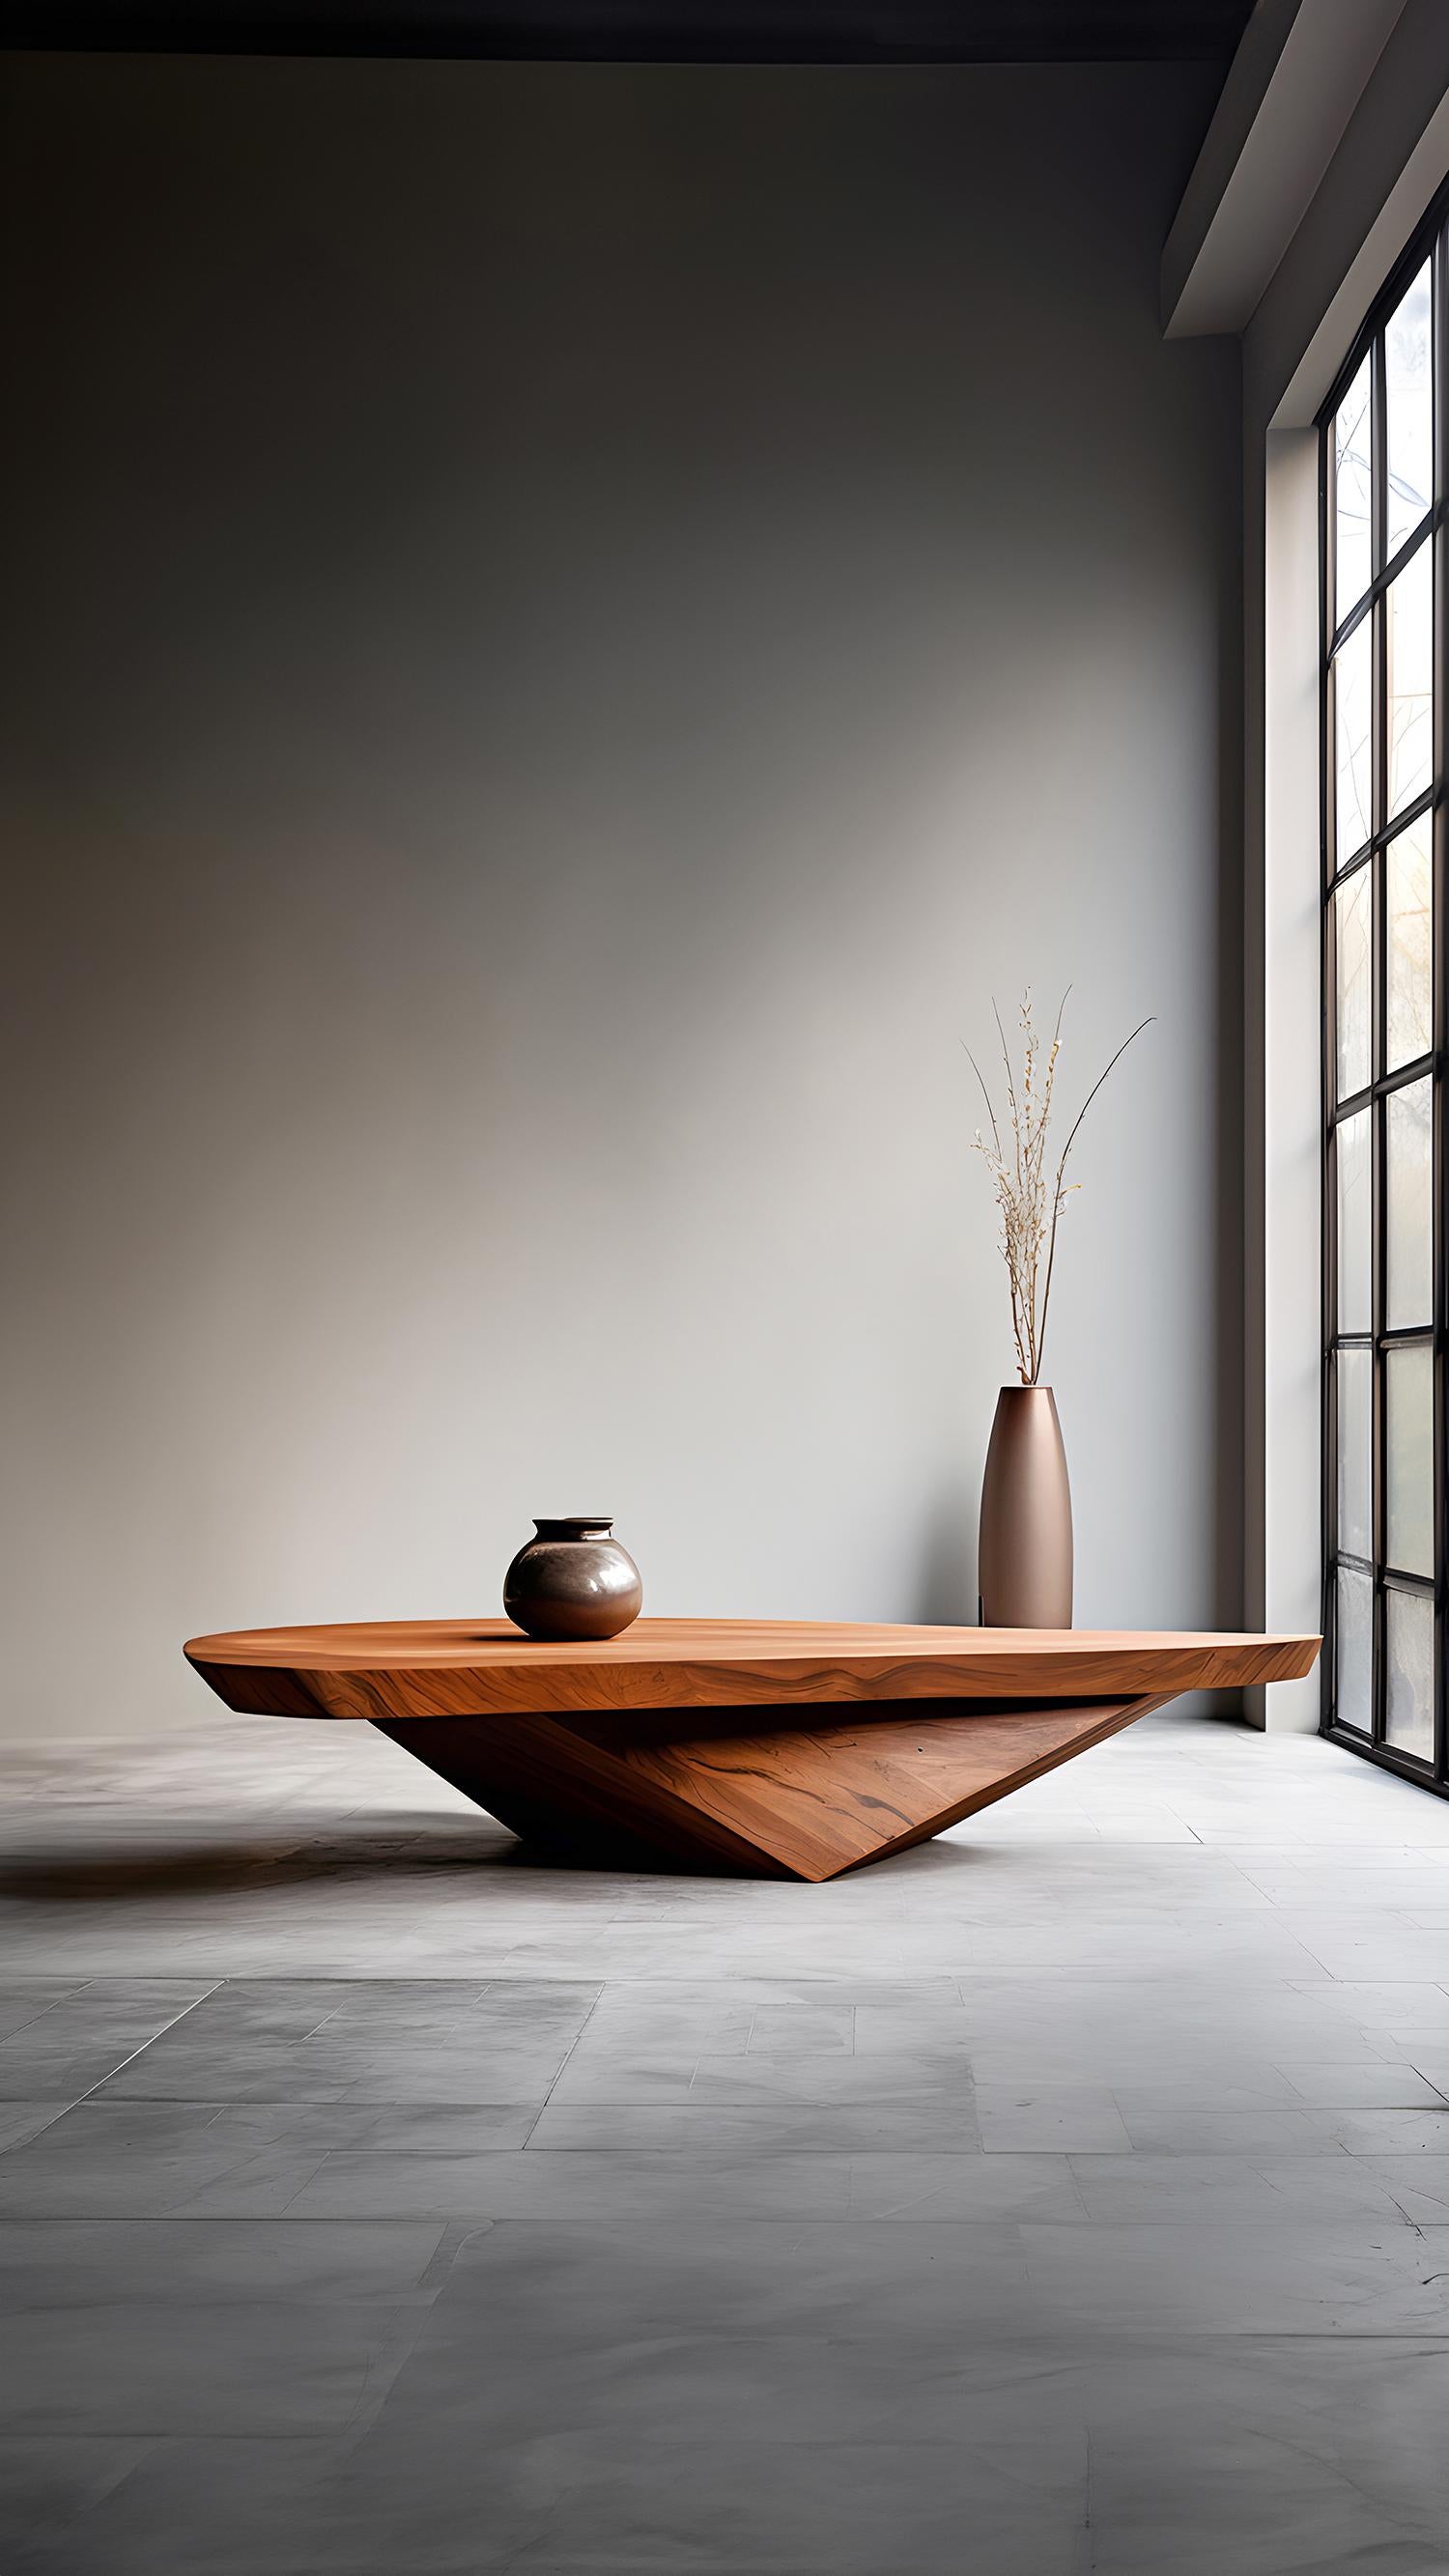 Hardwood Sculptural Coffee Table Made of Solid Wood, Center Table Solace S24 by NONO For Sale